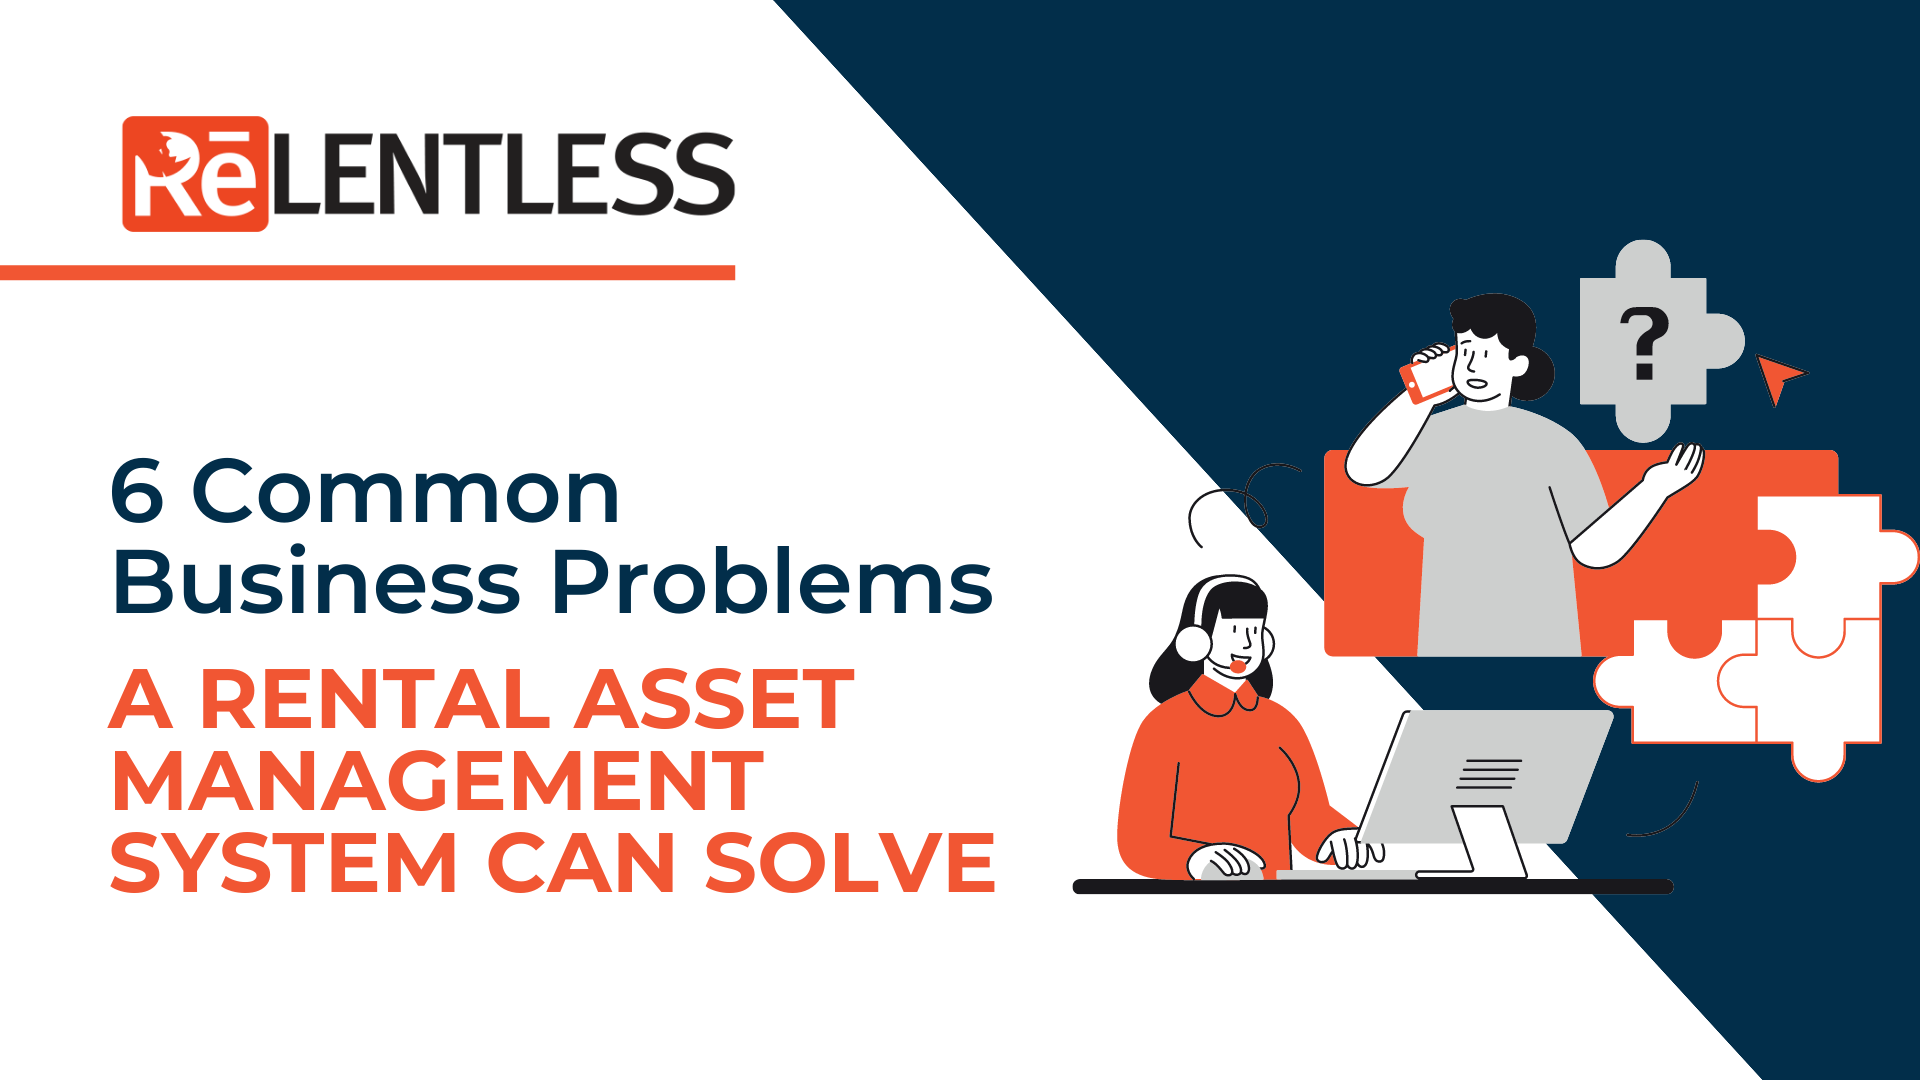 6 Common Business Problems a Rental Asset Management System Can Solve